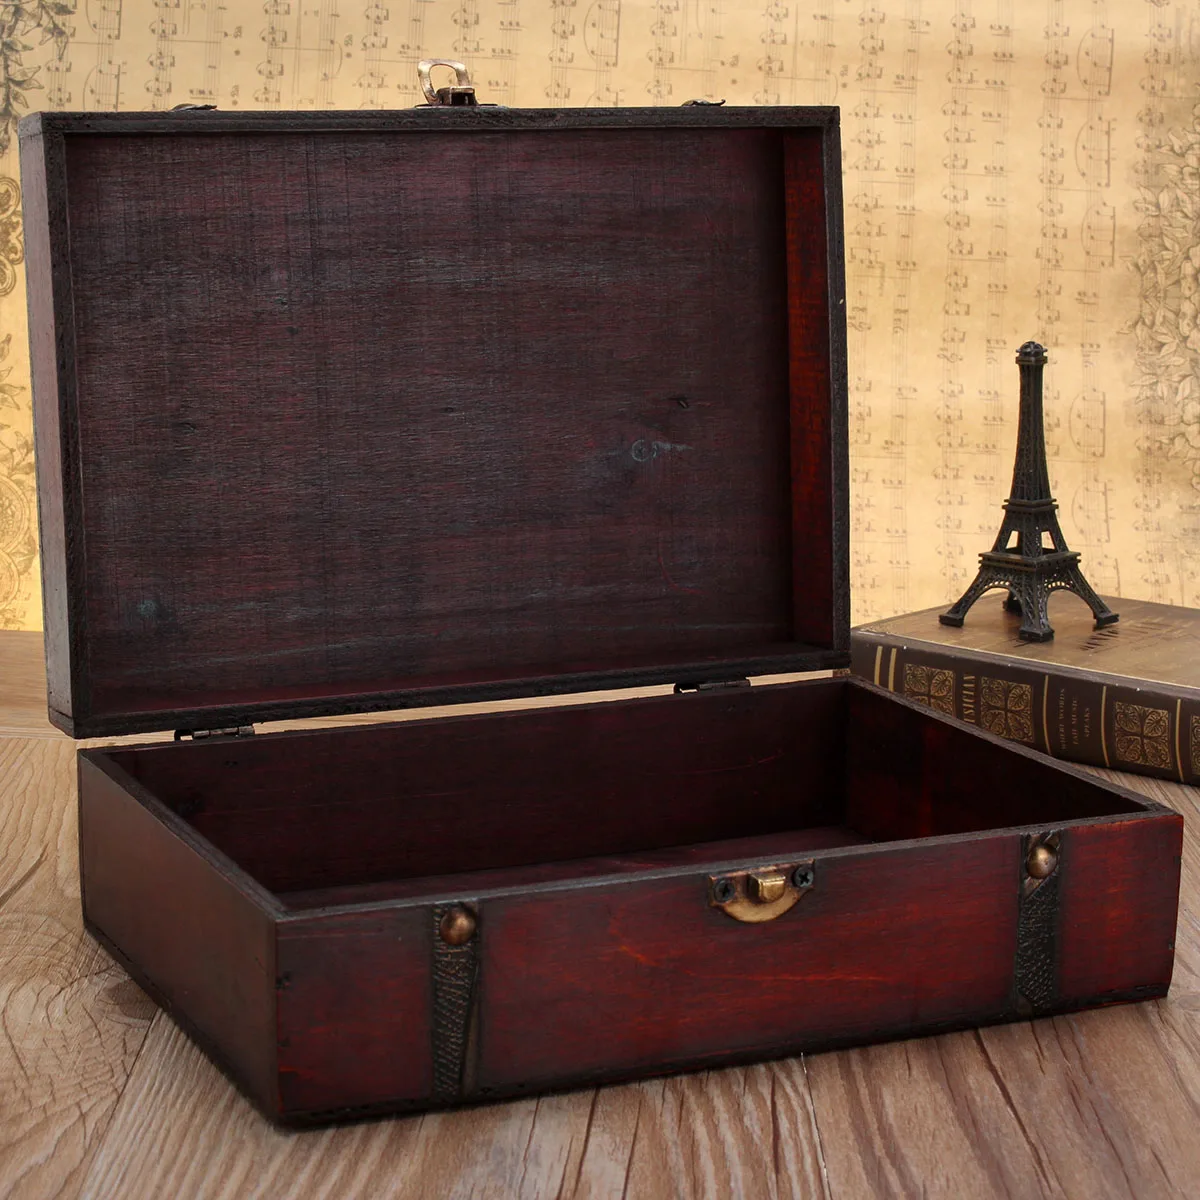 New 23X16X7.5cm Retro Lockable Box Holder Jewelry Box Storage Case Vintage  Wooden Storage Box Photography Props Gifts Cases - AliExpress